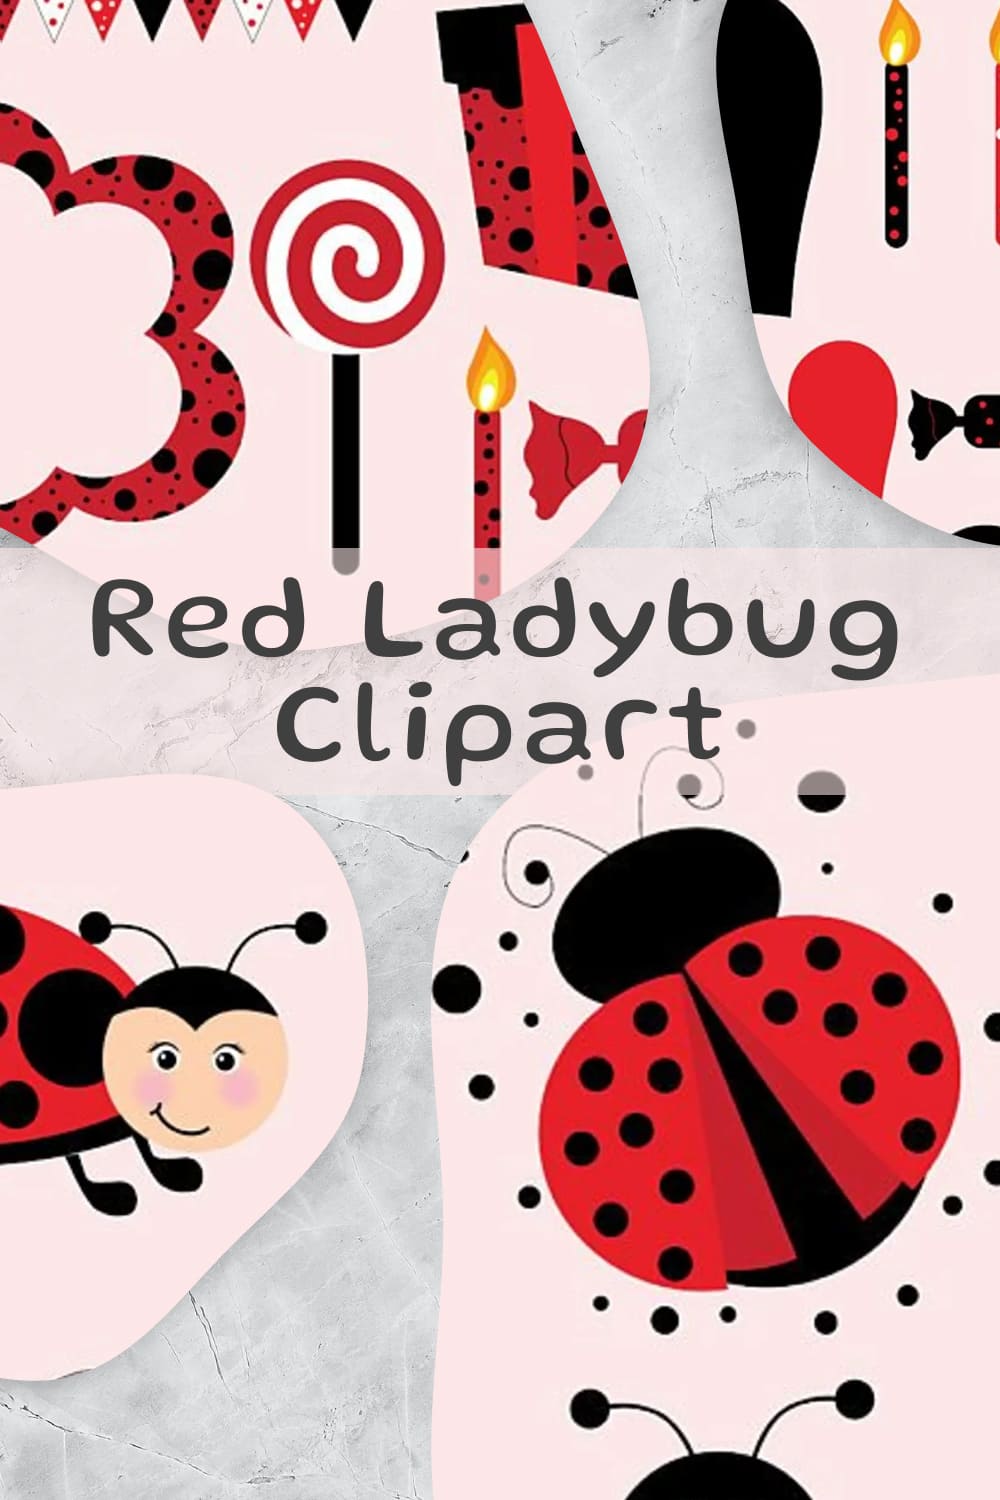 Red ladybug clipart - pinterest image preview.